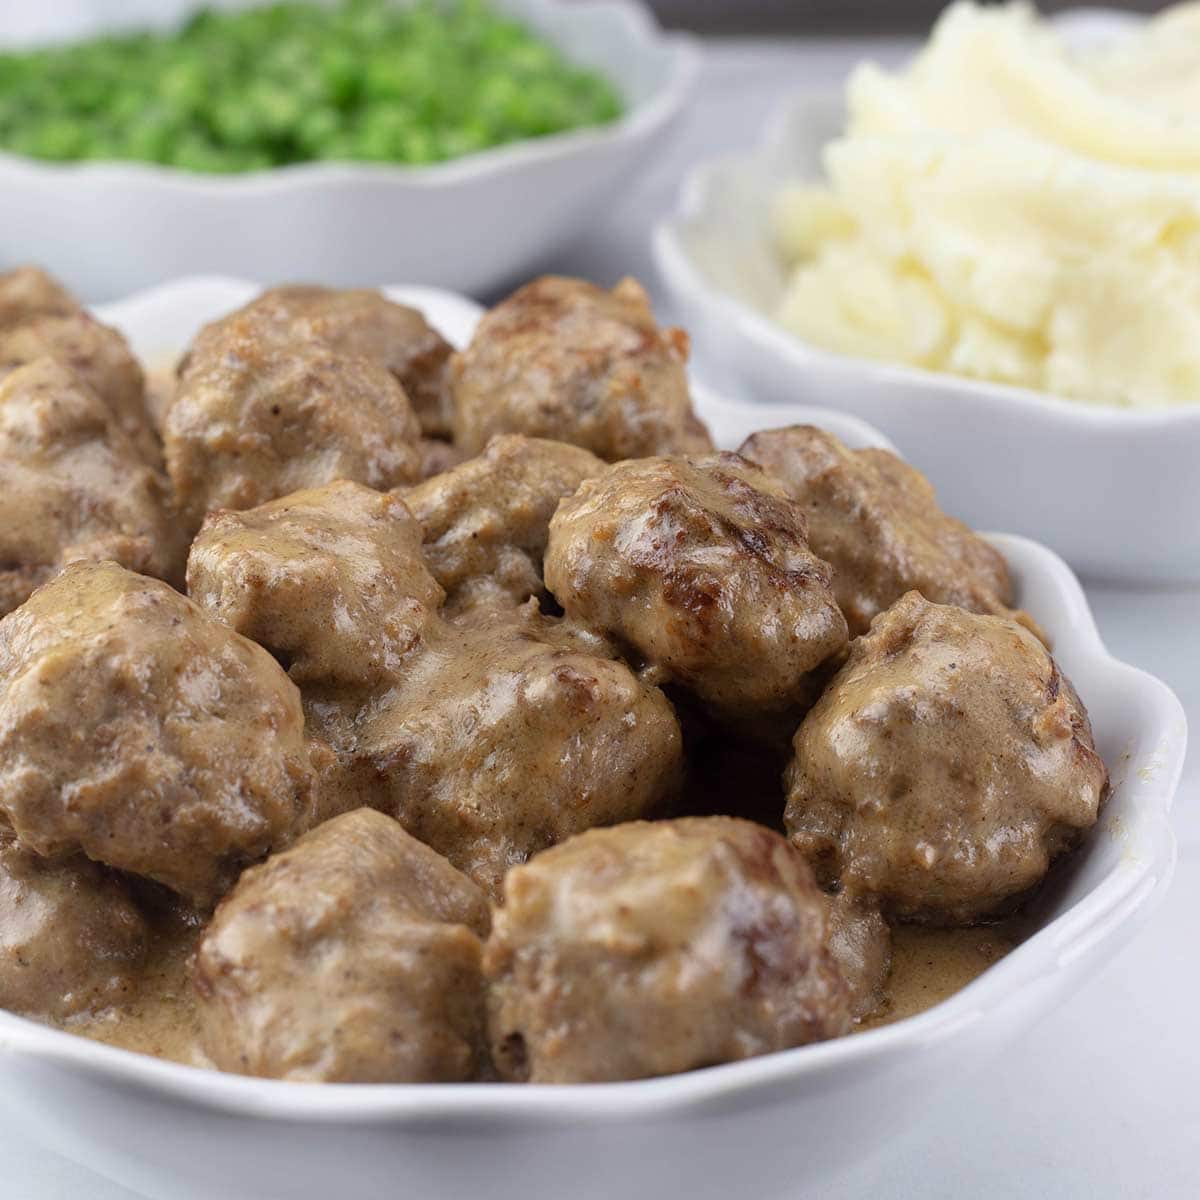 Swedish Meatballs in gravy in a white serving bowl next to mashed potatoes and peas.